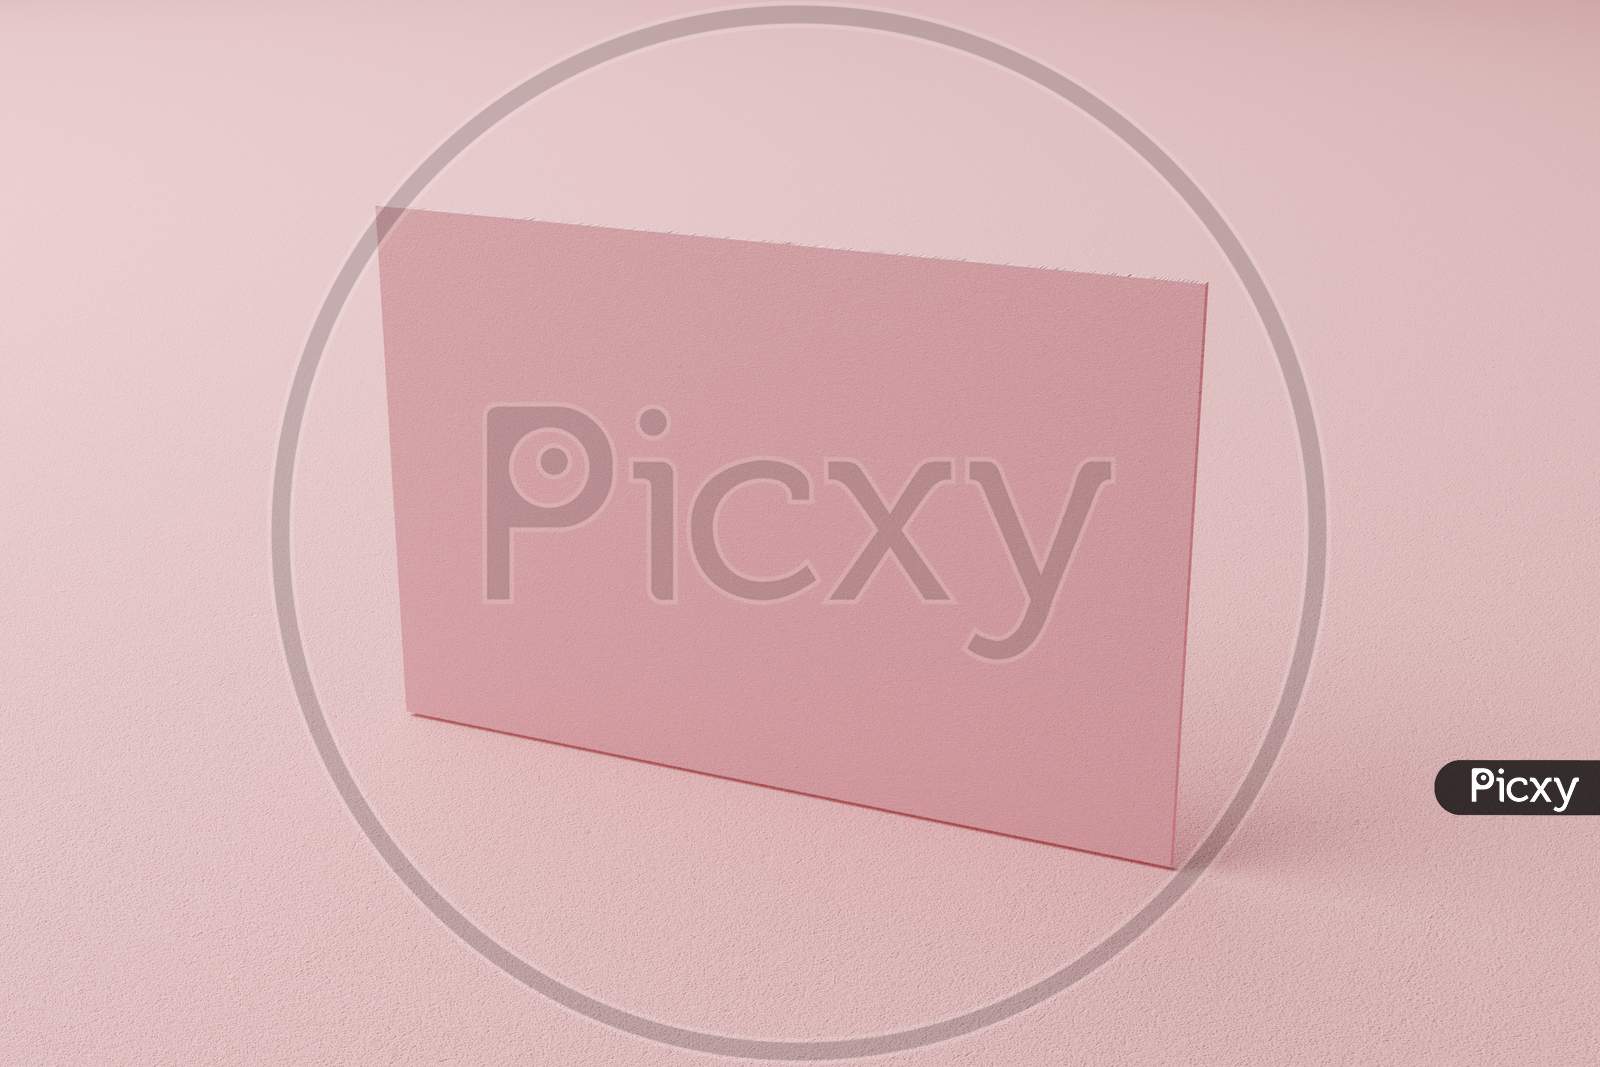 Pink Pastel Business Card Paper Mockup Template With Blank Space Cover For Insert Company Logo Or Personal Identity On Cardboard Background. Modern Style Concept. Side View. 3D Illustration Render